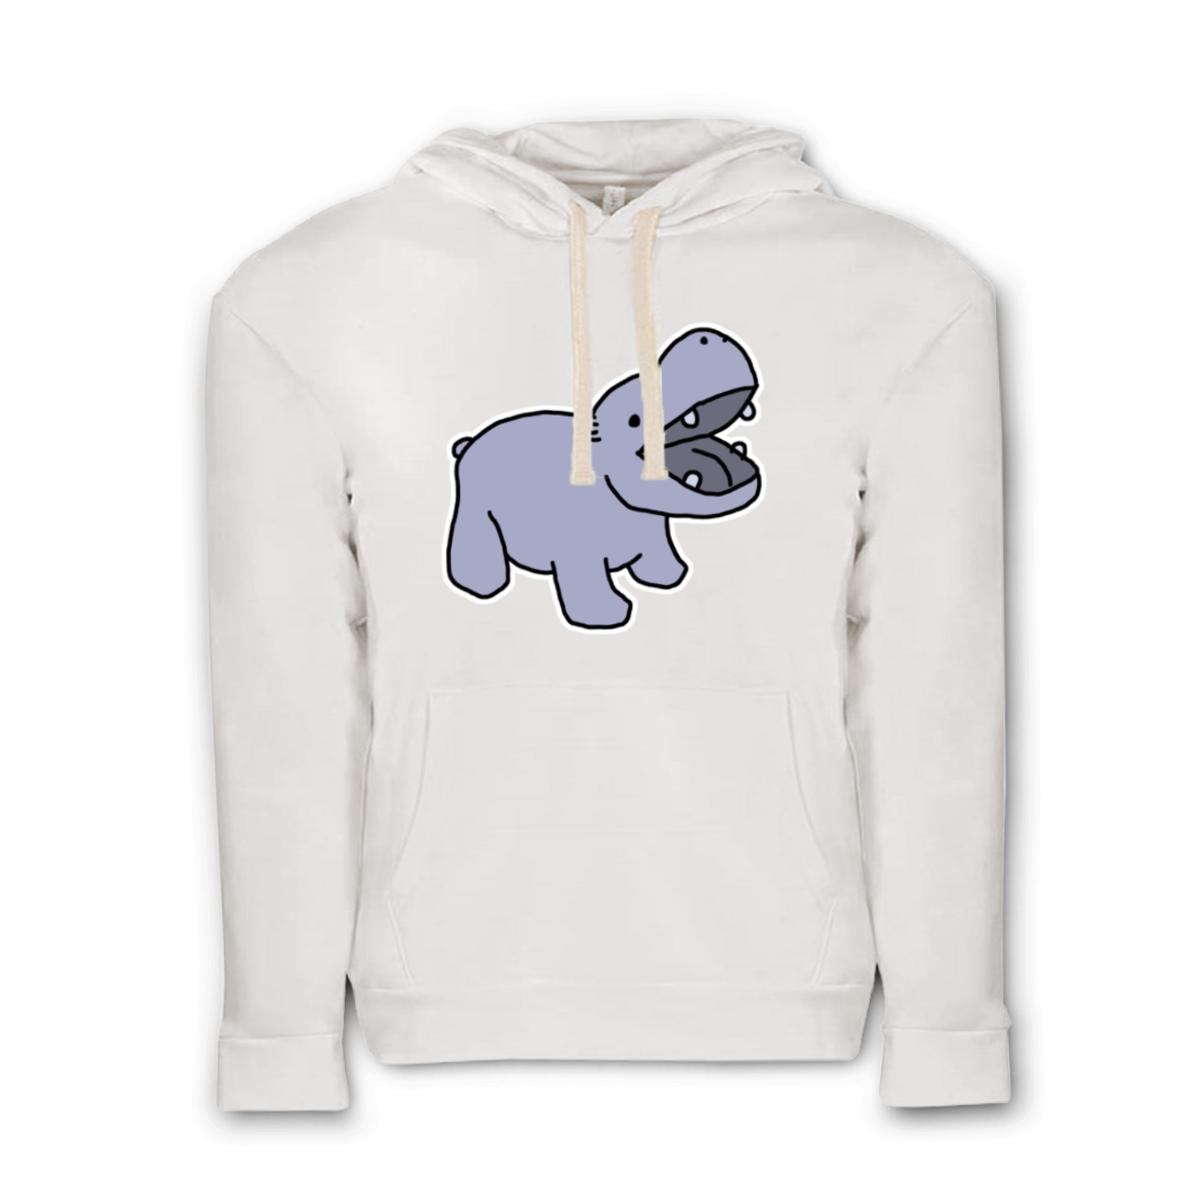 Toy Hippo Unisex Pullover Hoodie Large white